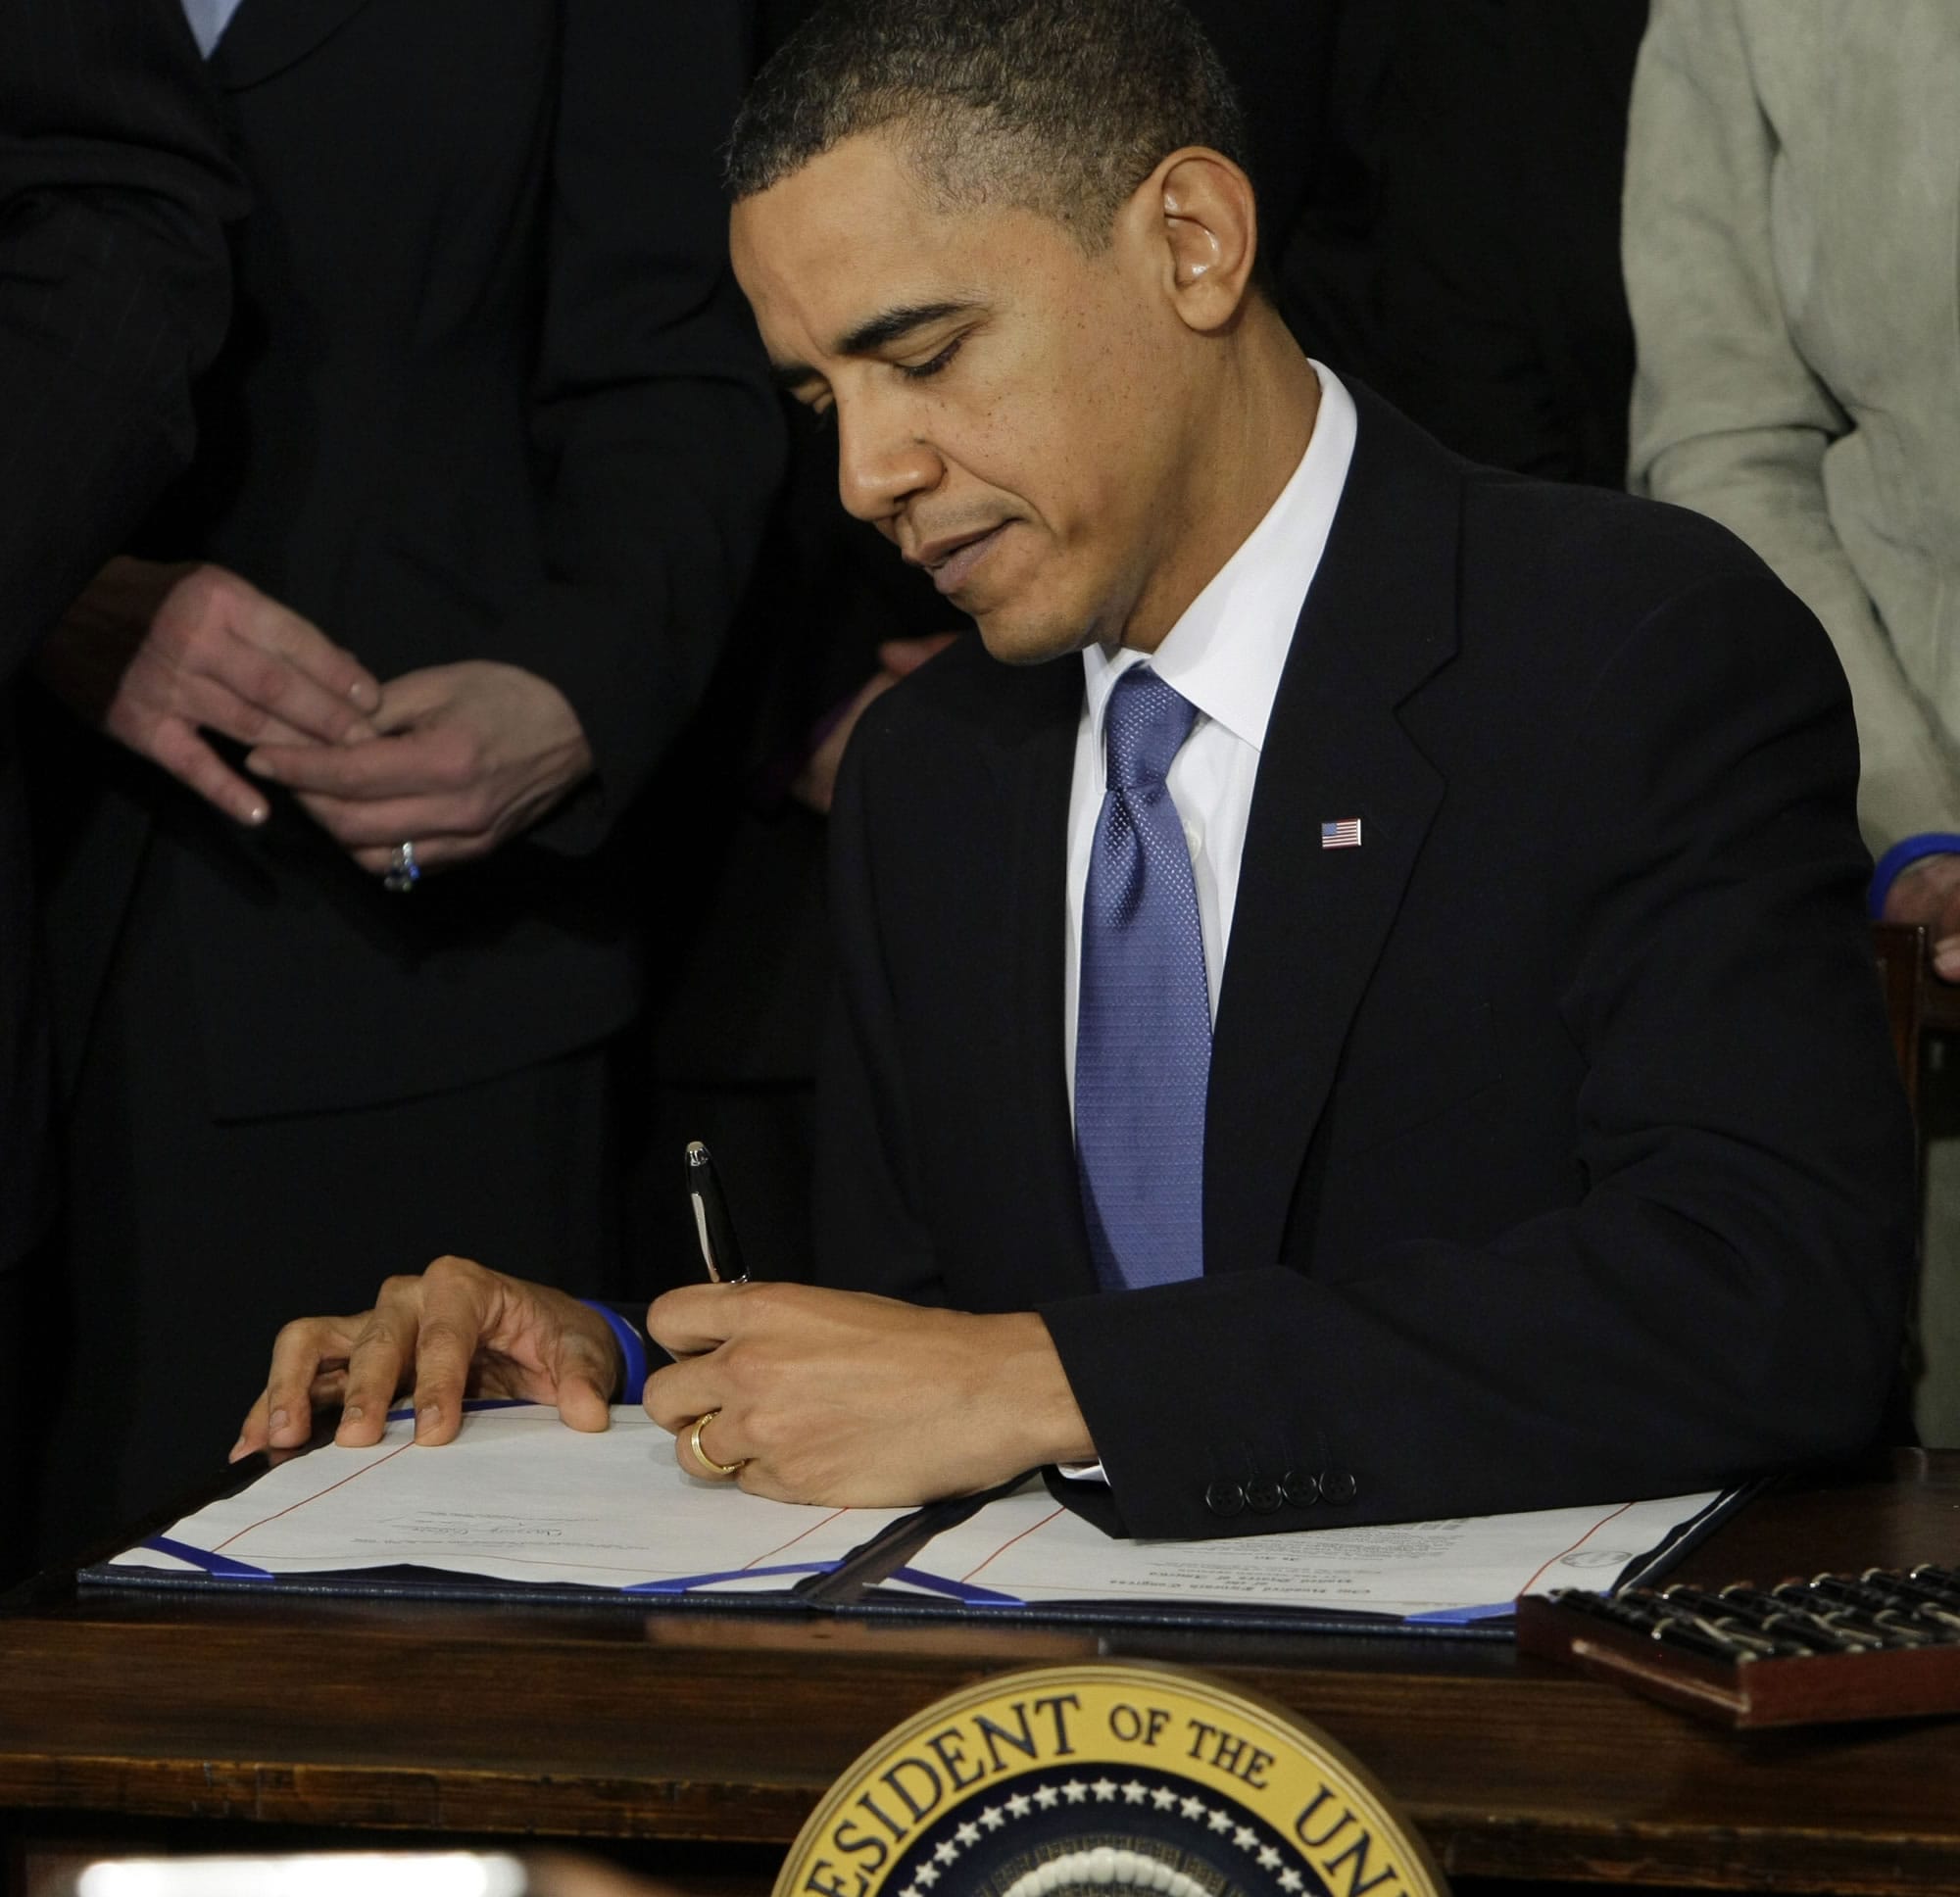 President Barack Obama signs the Affordable Care Act into law on March 23, 2010.